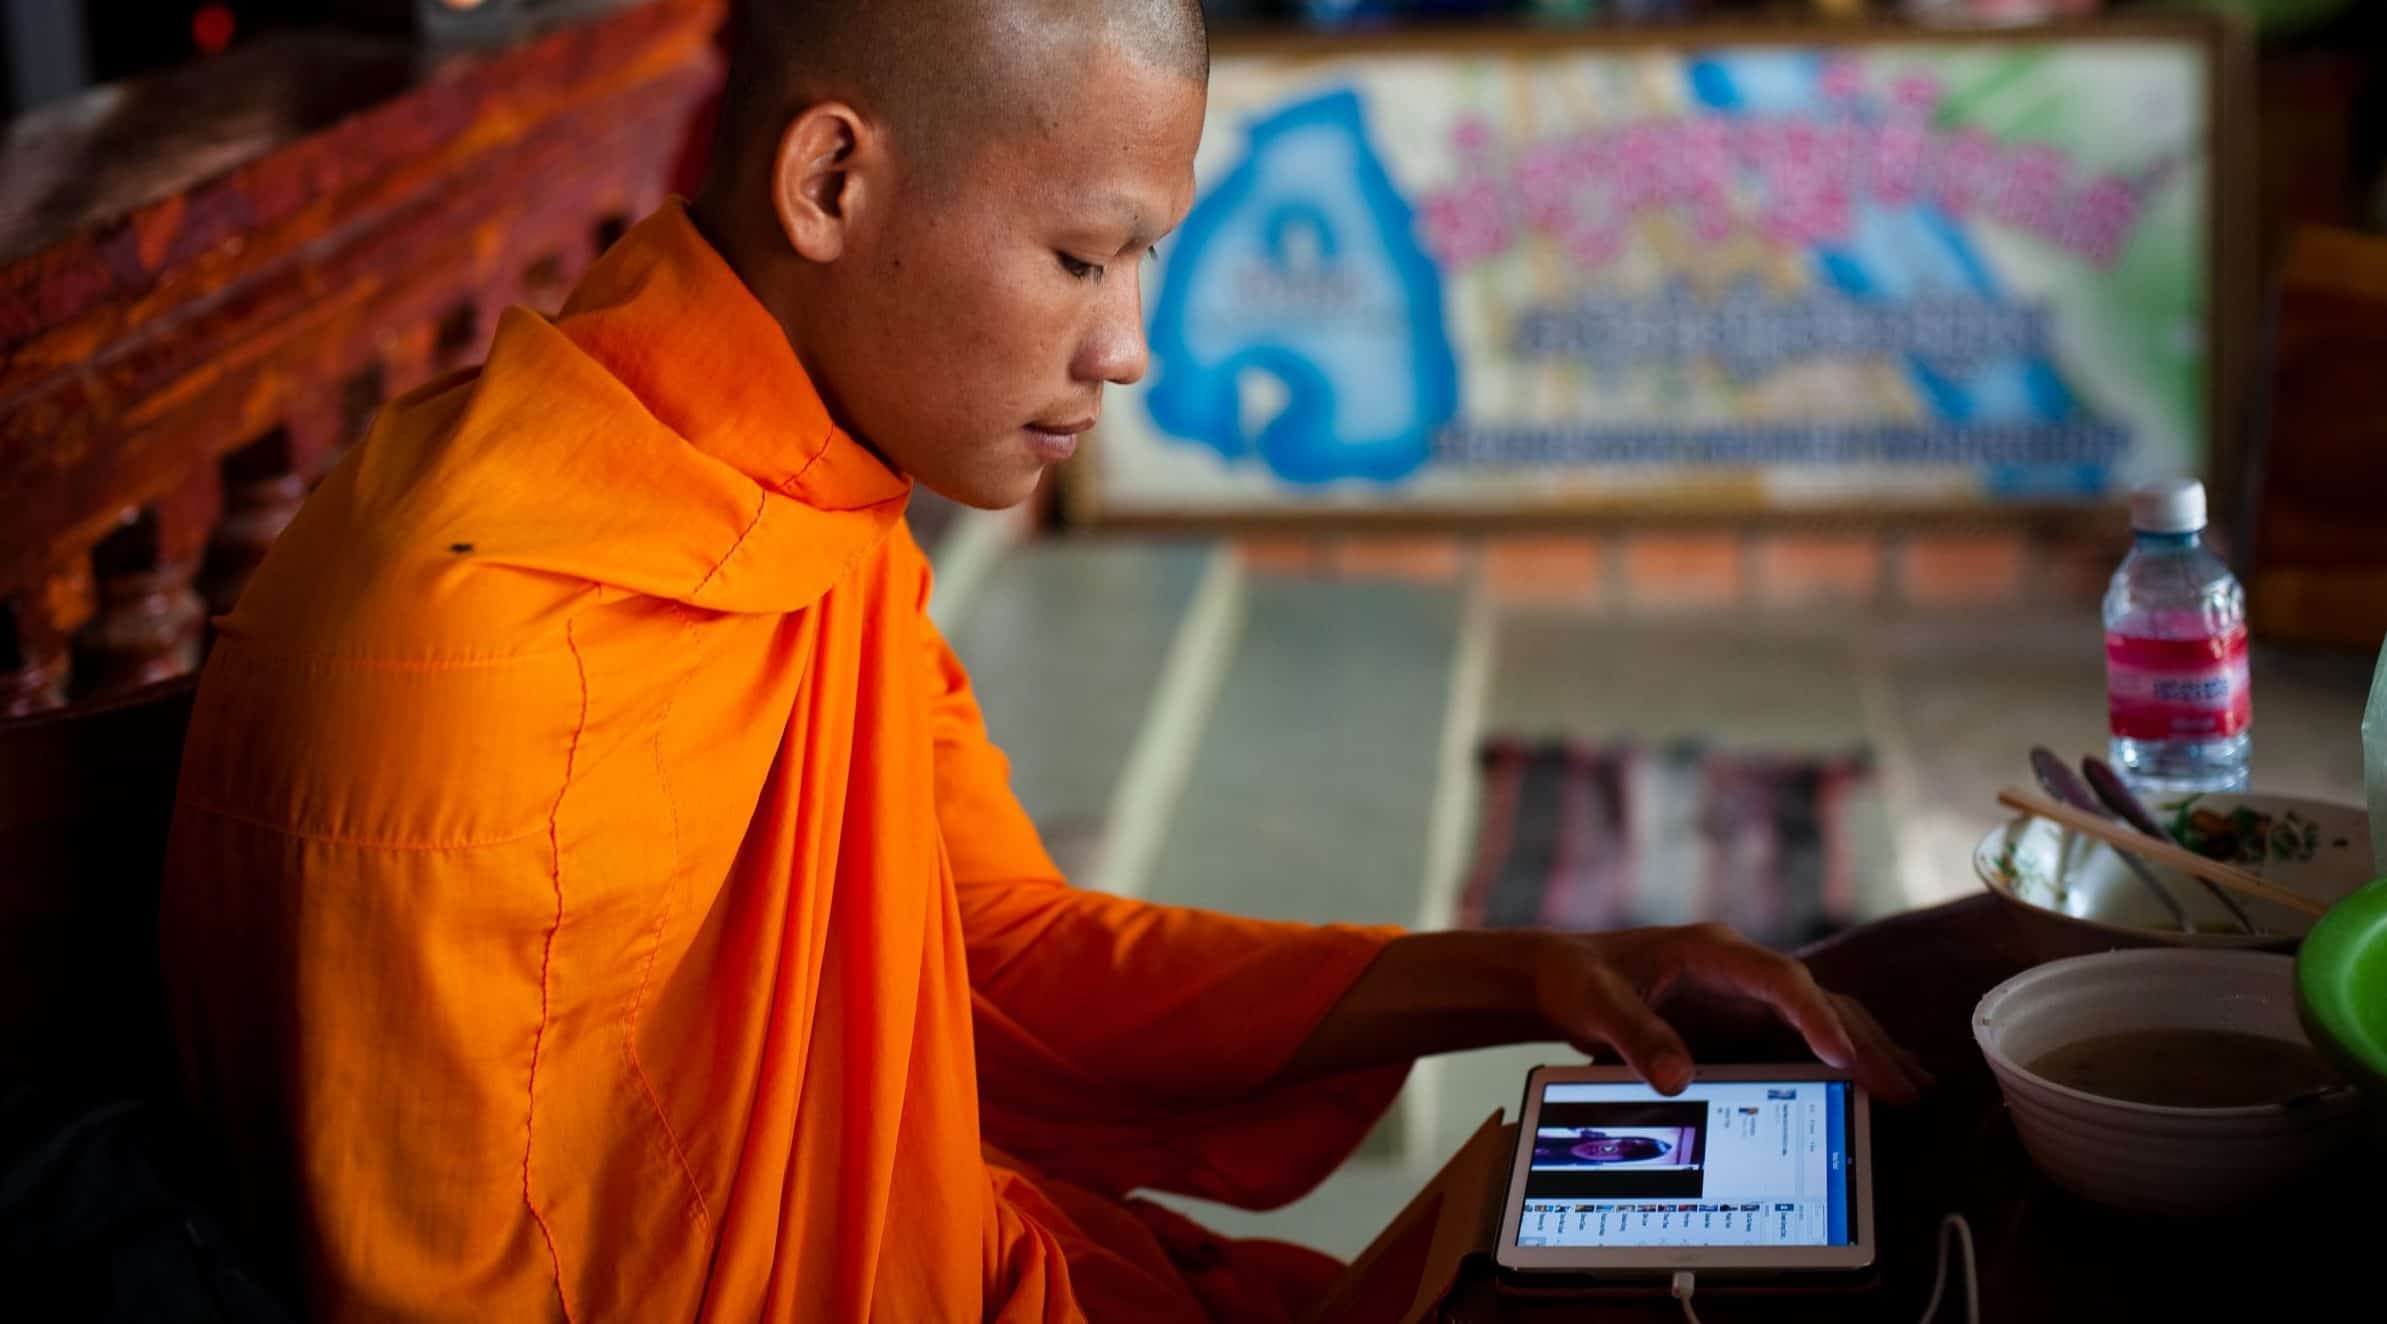 A man wearing an orange robe holds a tablet